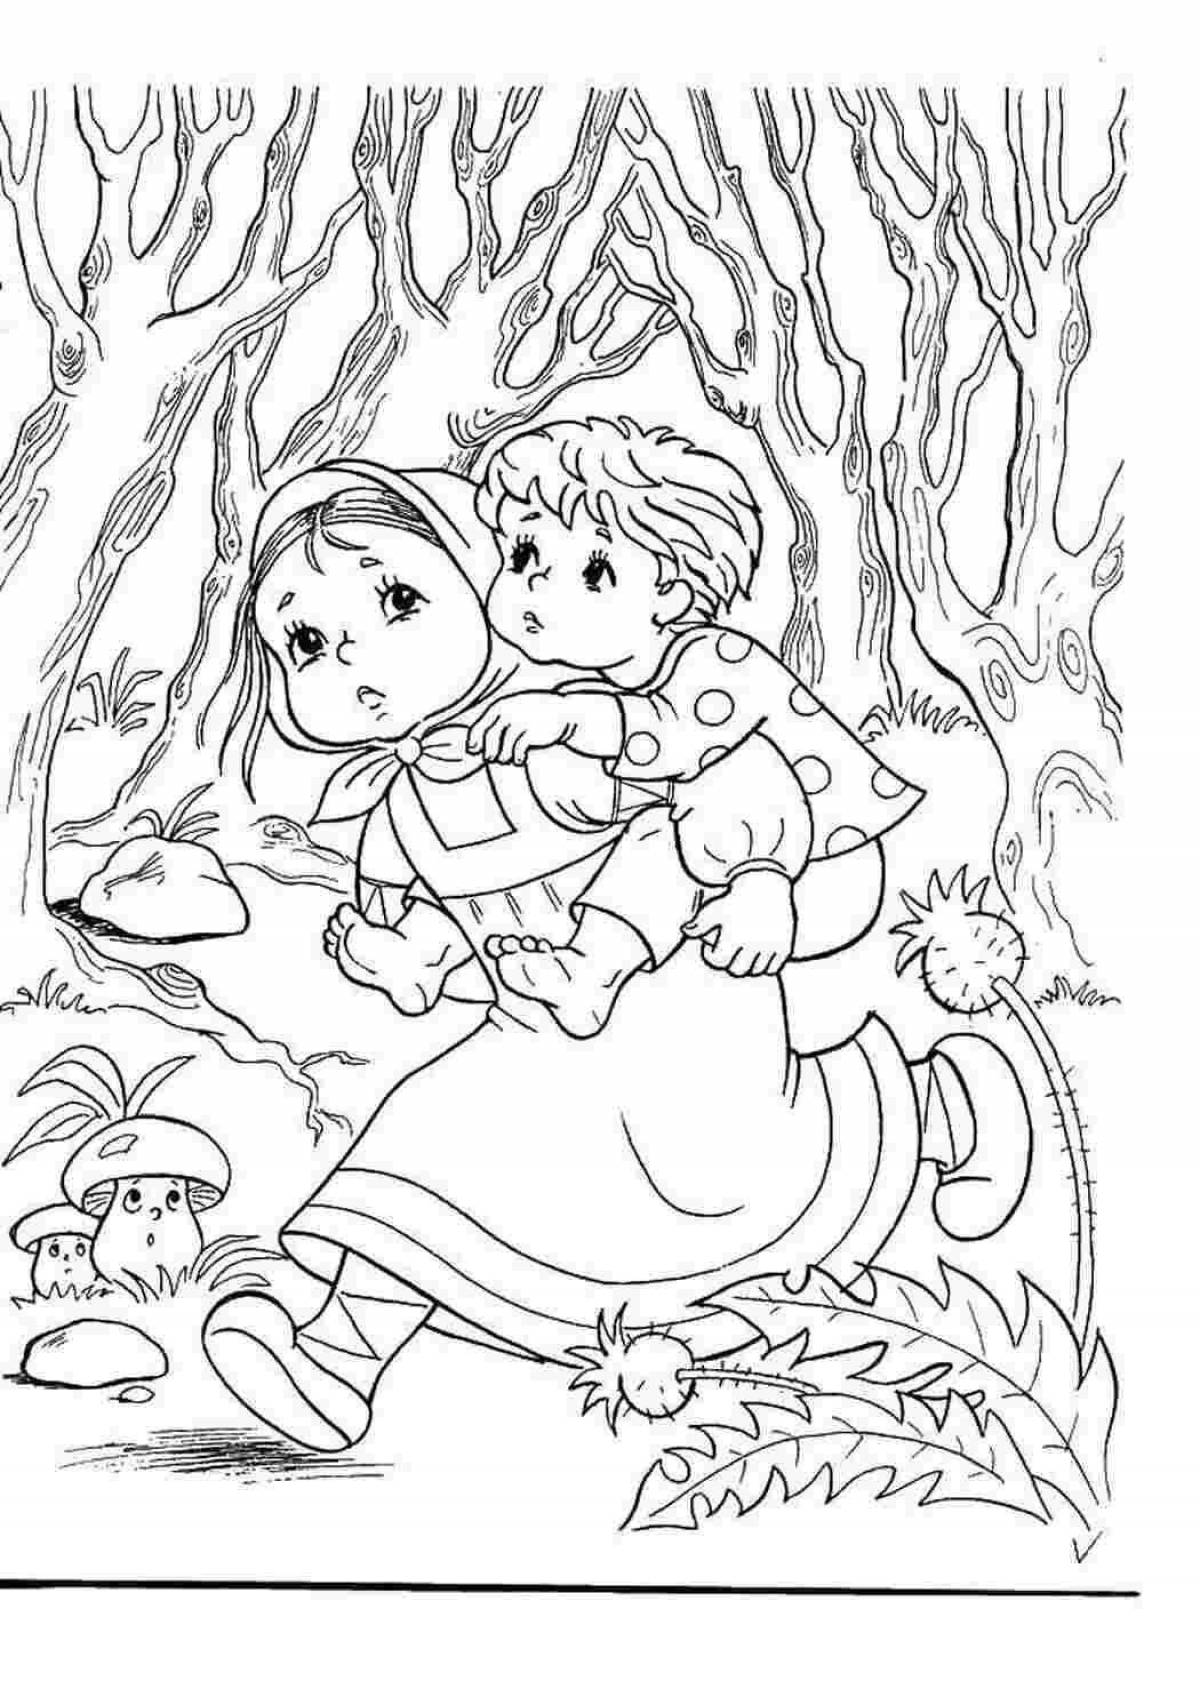 Dazzling coloring page fairy tale illustration